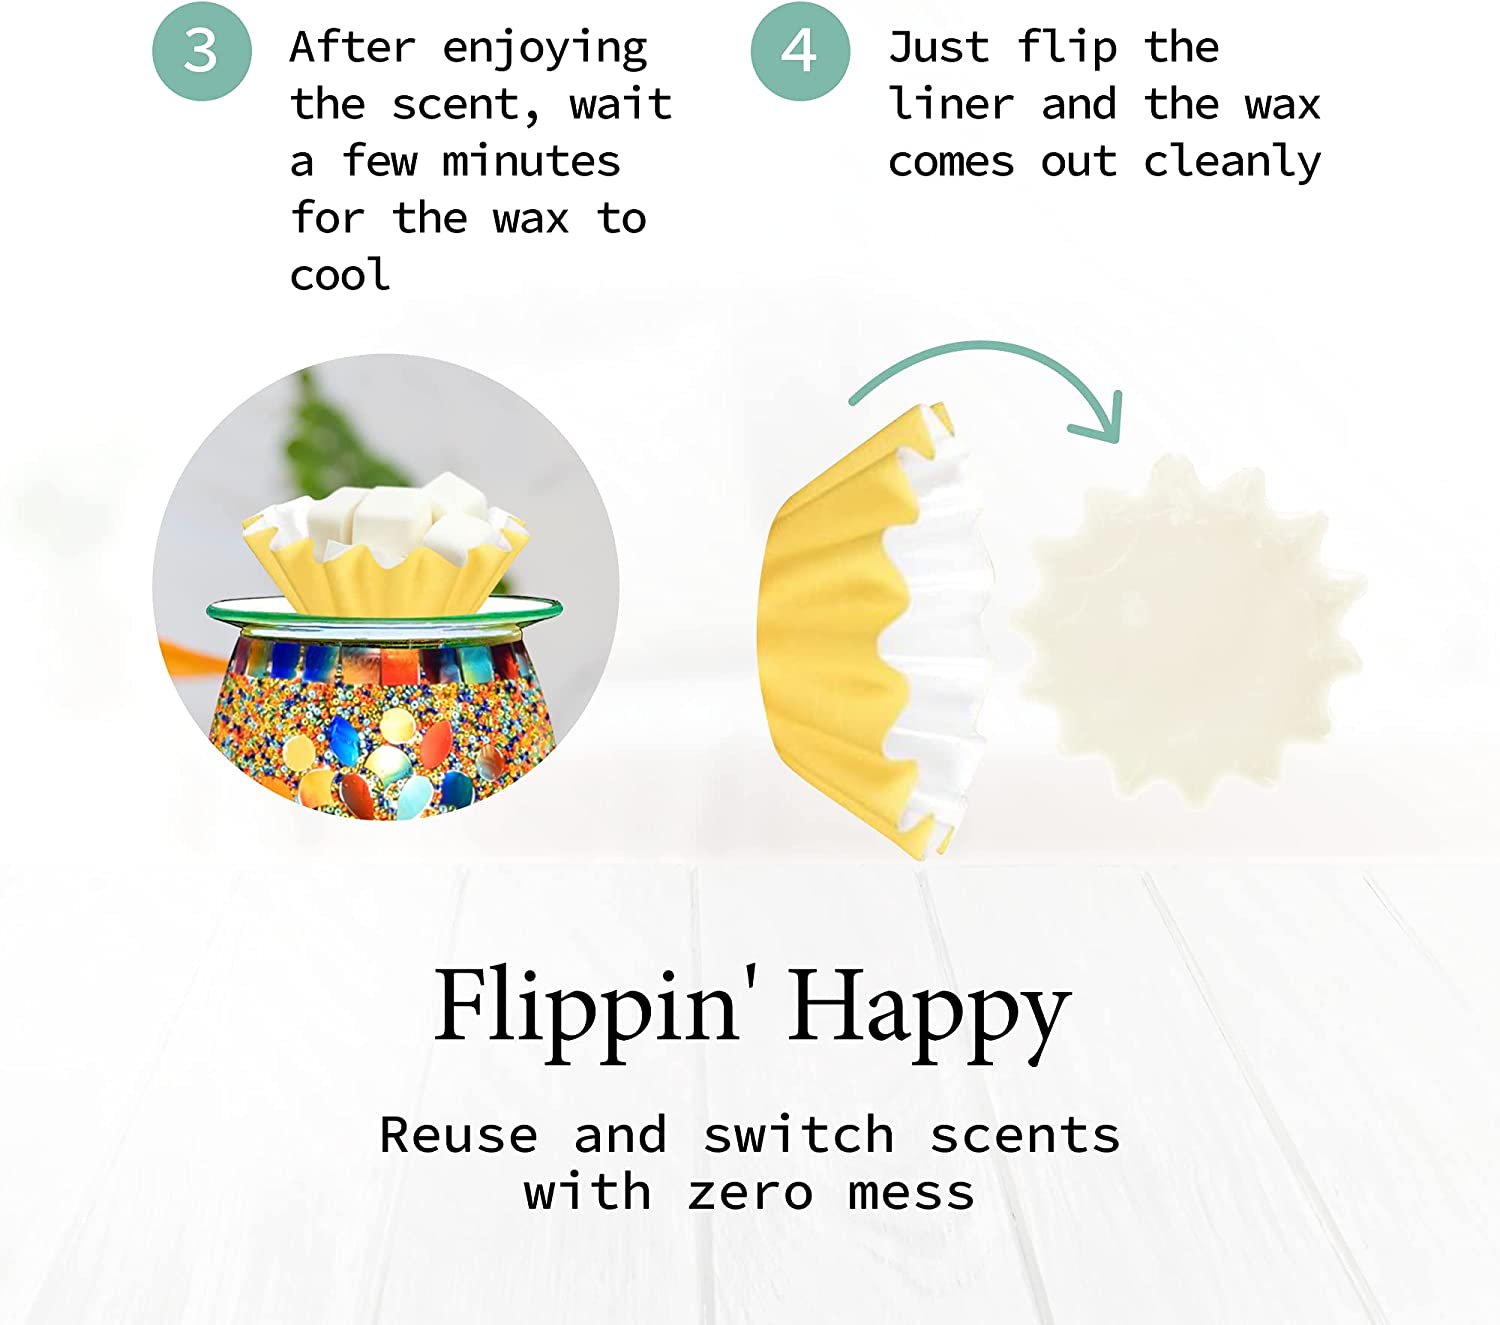 Flippin' Happy BUNDLE of Jelly Bean Wax Melter, Spa Day Wax Melts and